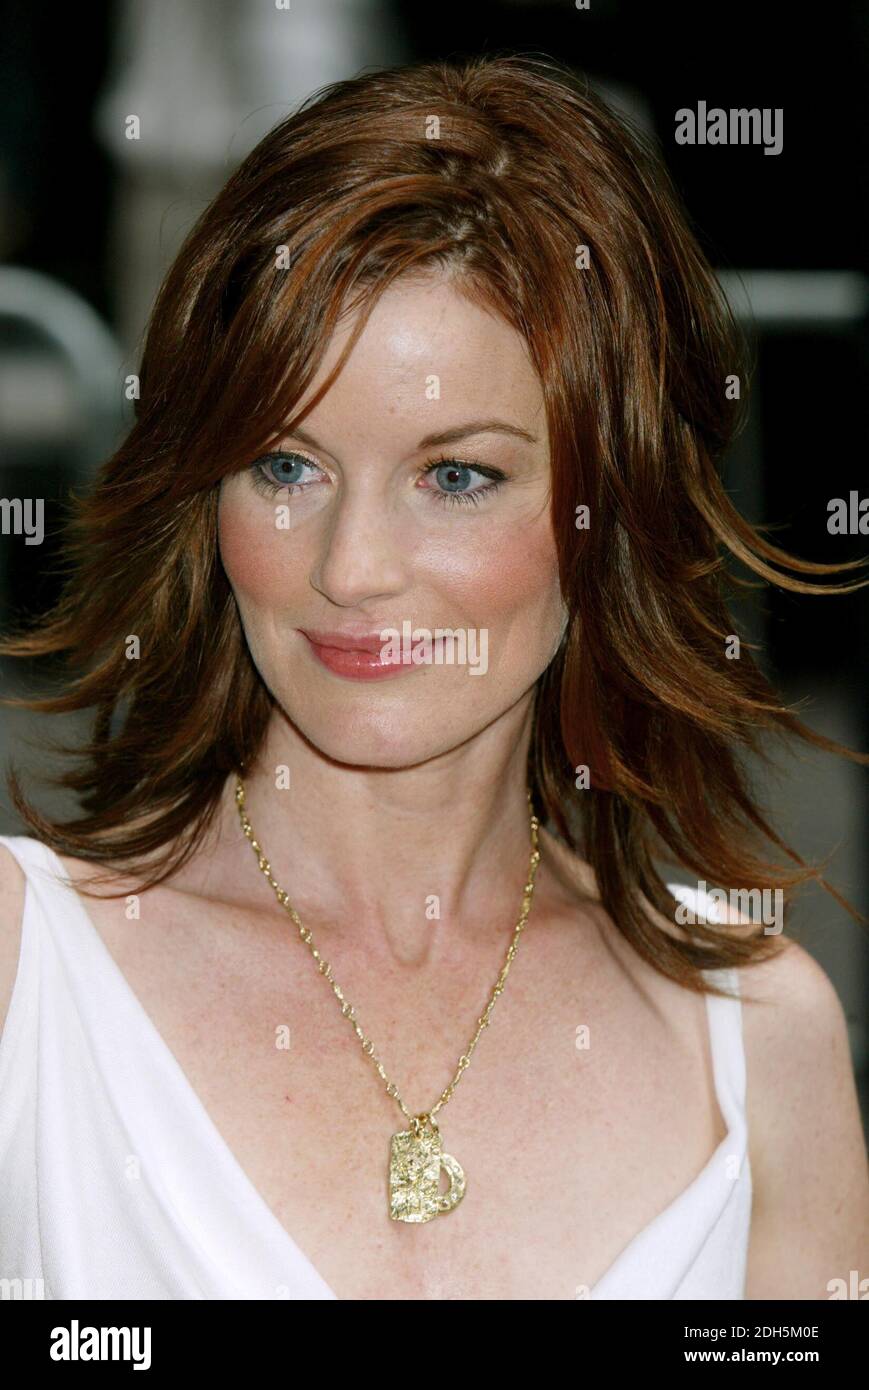 NEW YORK, NY- MAY 18: Laura Leighton arrives at the 2004-05 ABC Network Upfront Presentation held at Cipriani’s, on May 18, 2004, in New York City. Credit: Joseph Marzullo/MediaPunch Stock Photo